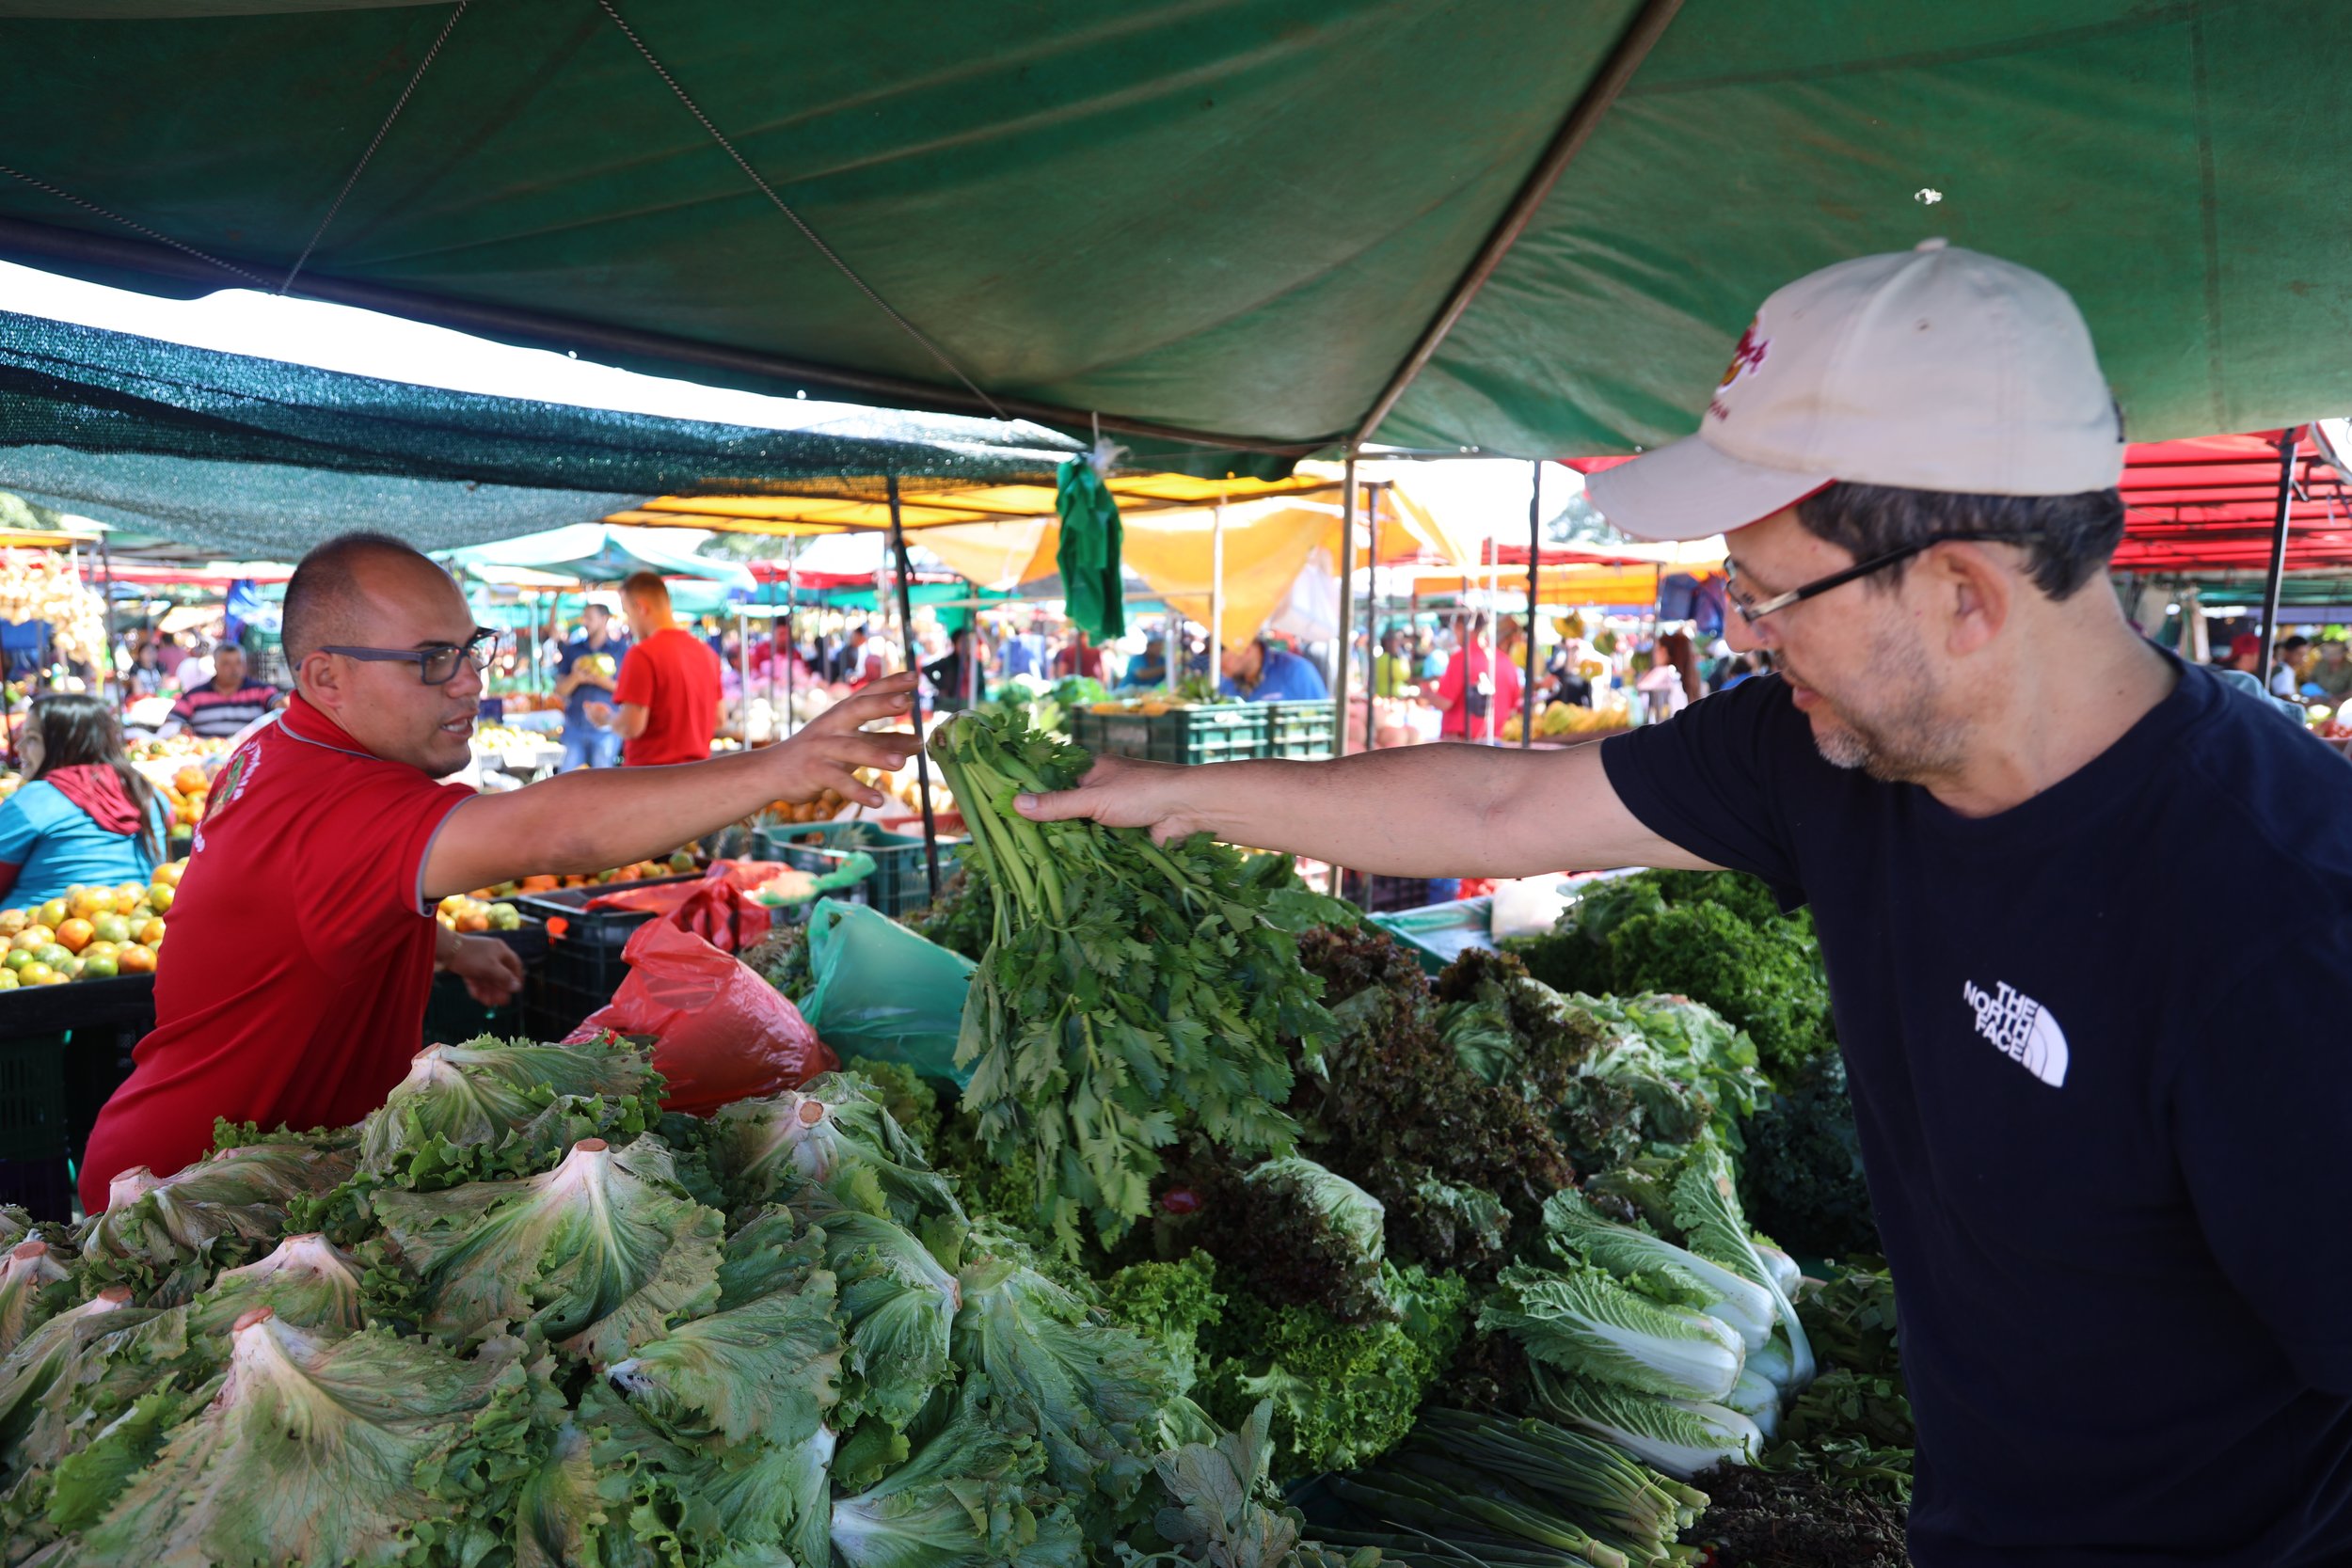  On Saturday, Class XVII took a long bus ride to the airport and a short flight to San Jose, Costa Rica.&nbsp; On Sunday, the class members toured a farmer's markets full of fresh vegetables and a wide variety of fruits, as well as finished emapandas